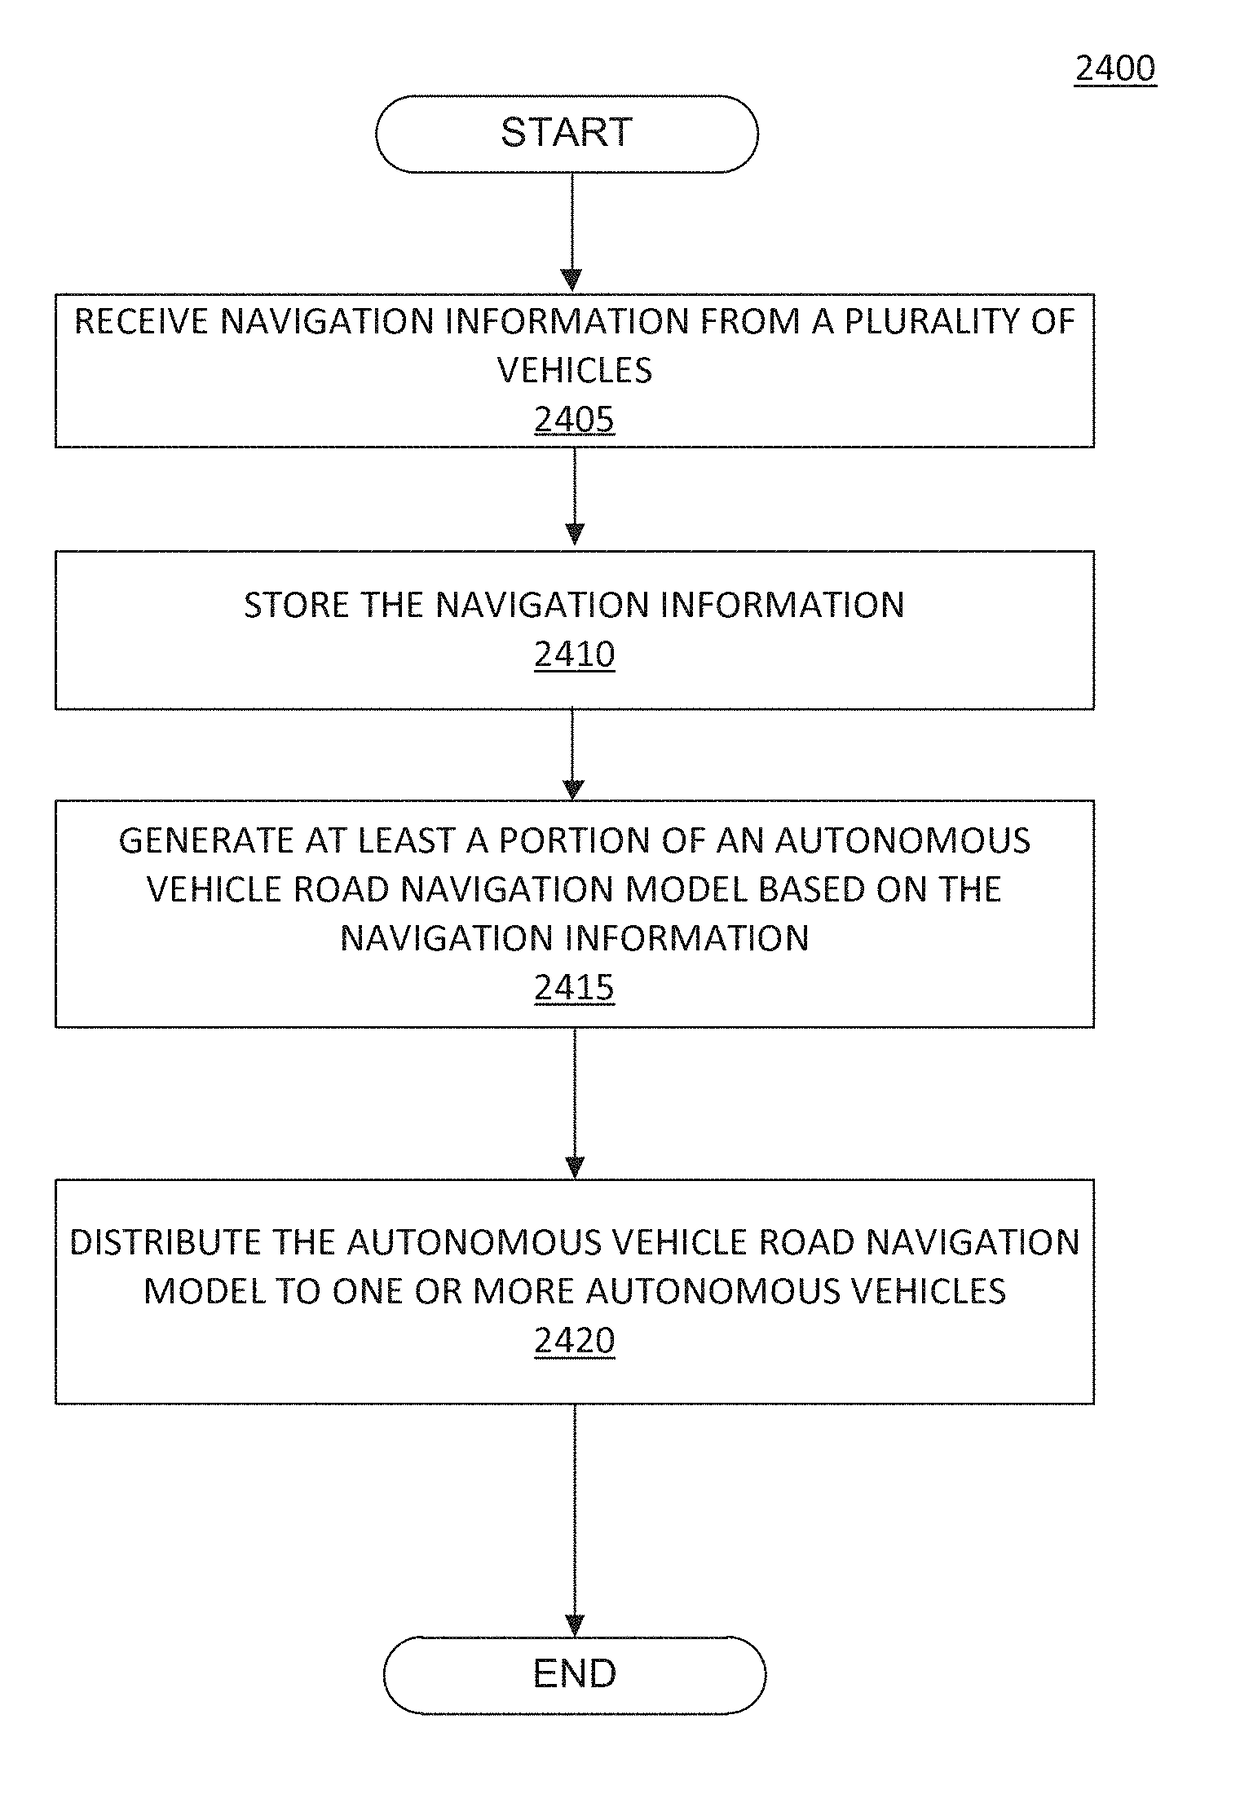 Crowdsourcing the collection of road surface information